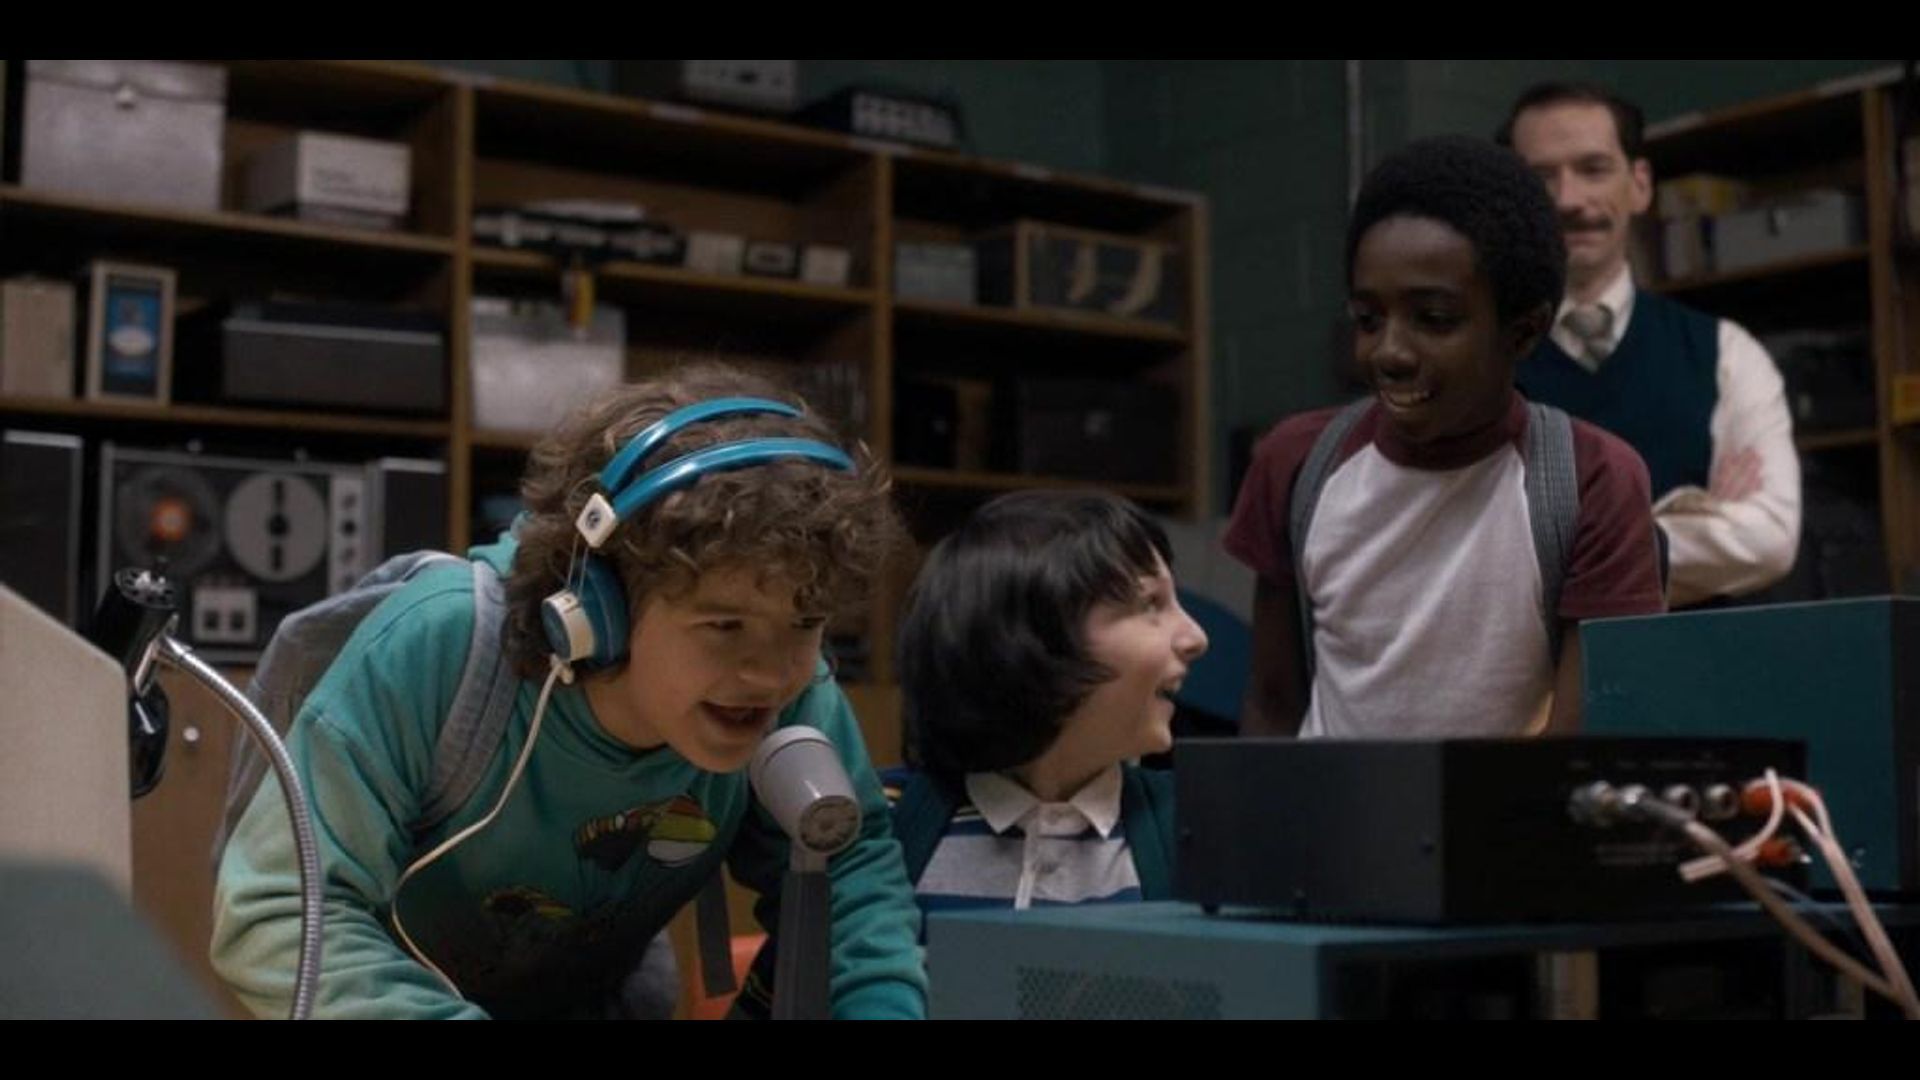 Back in season one, the Stranger Things kids used a Heathkit ham radio in the audiovisual (AV) club room to contact Will in the Upside Down with Eleven's help.